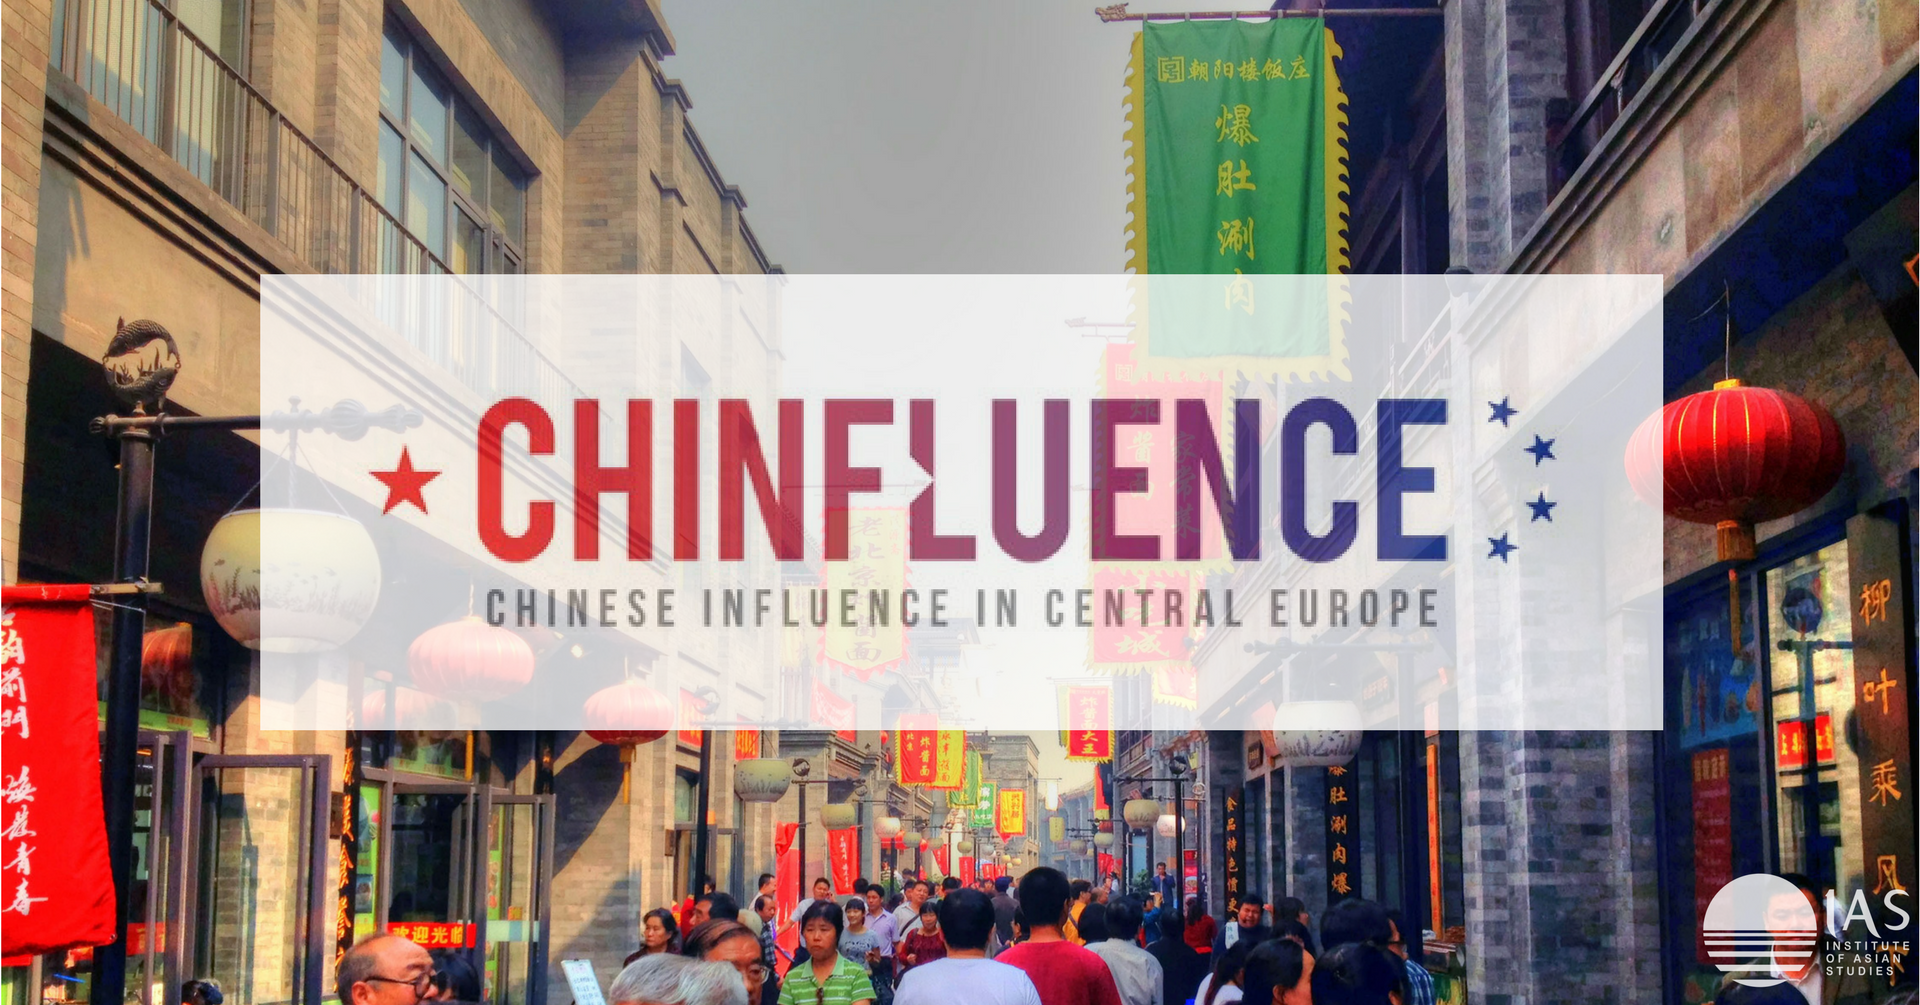 Central Europe for Sale: The Politics of China’s Influence